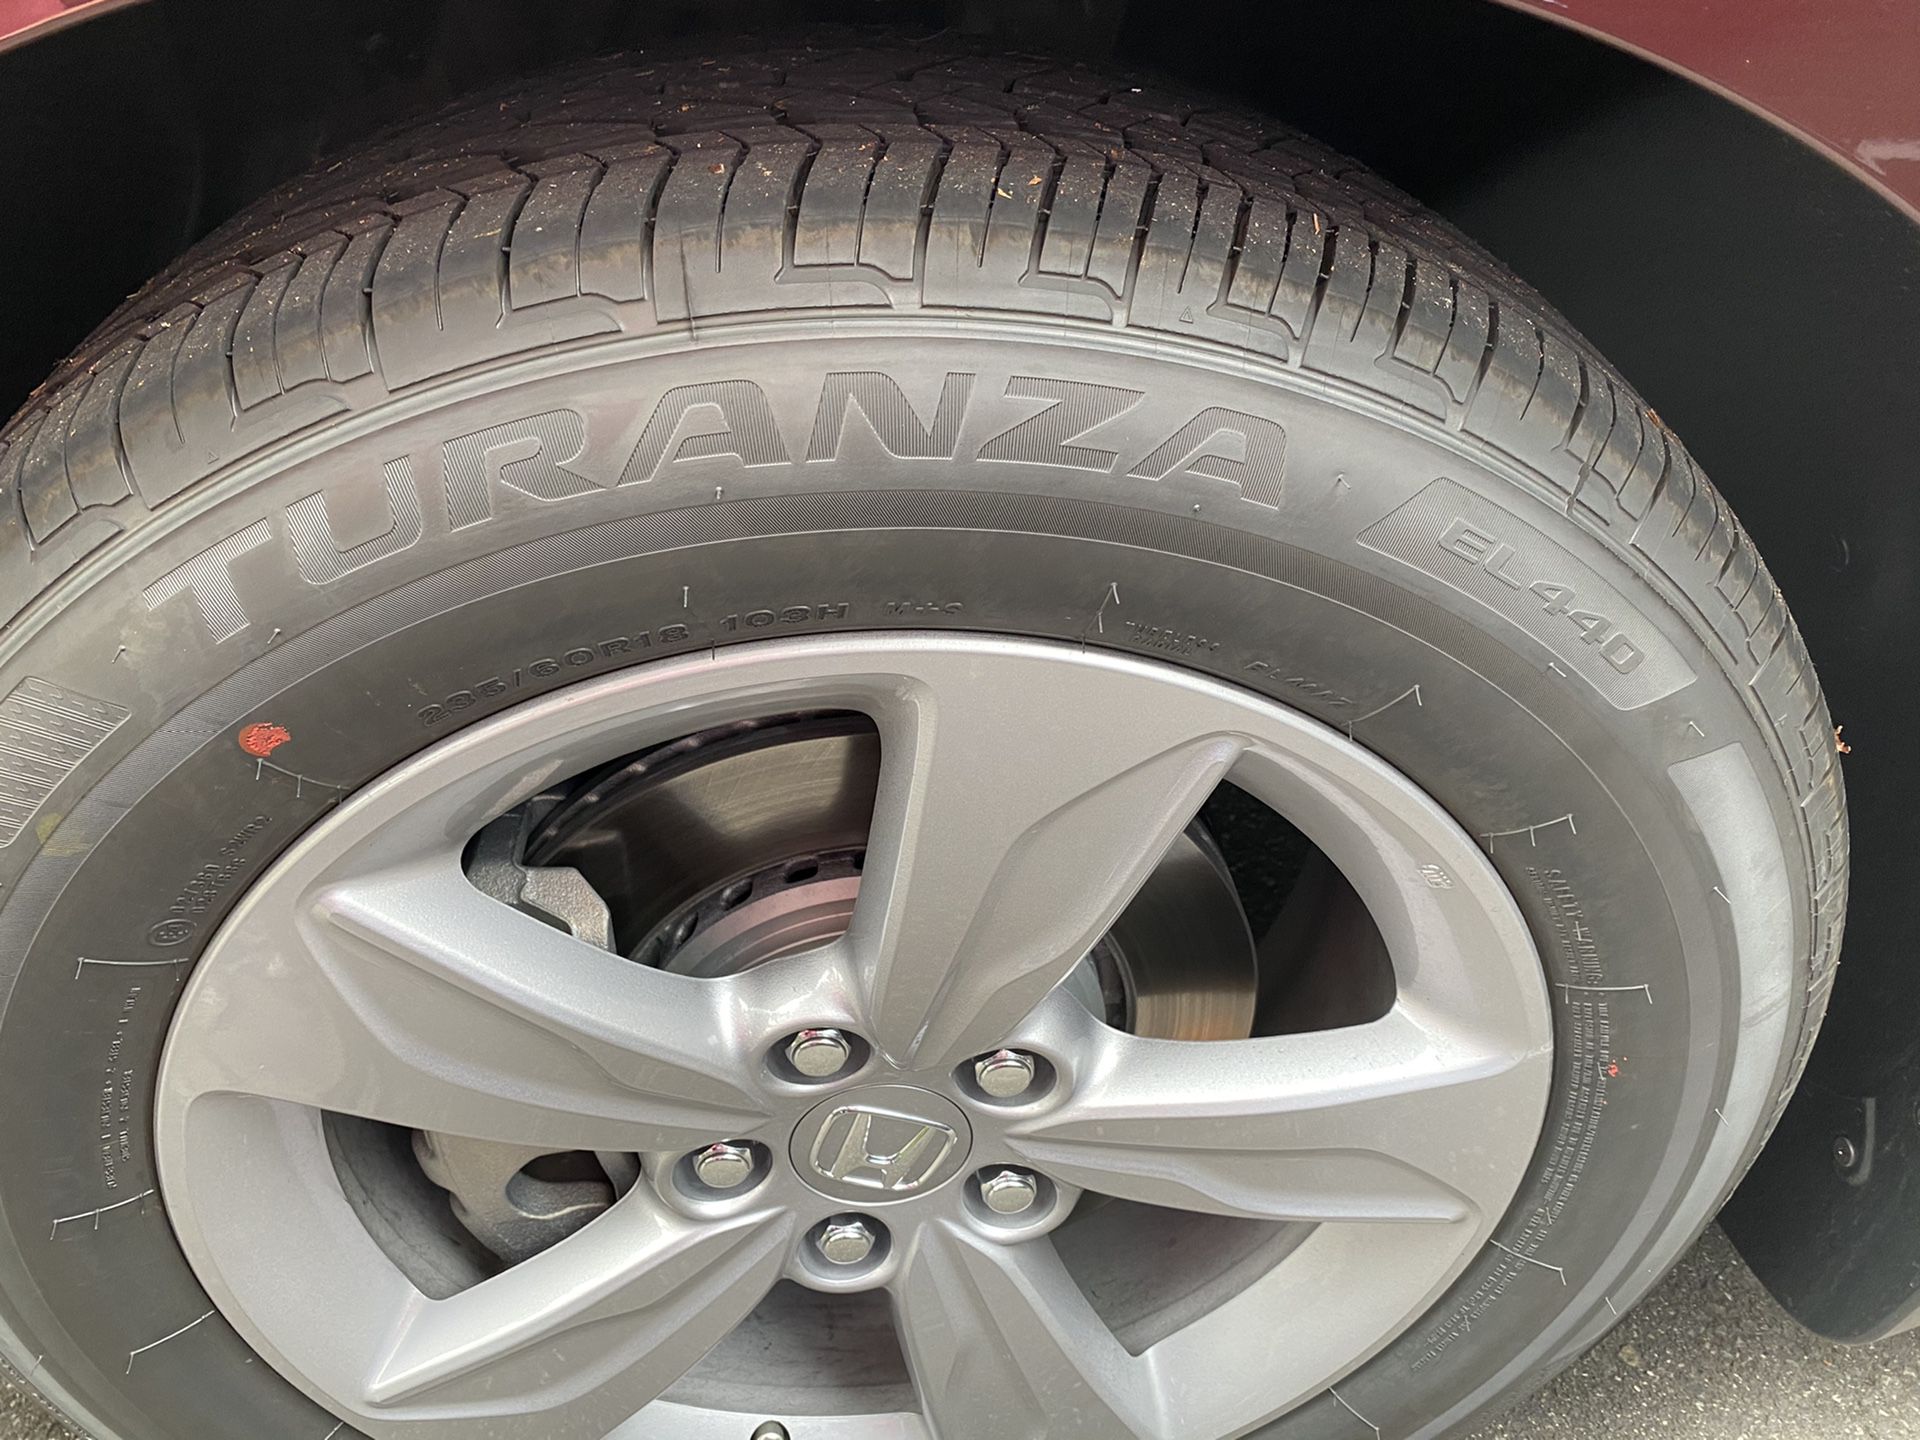 2020 Honda Odyssey Wheels and Tires - NEW